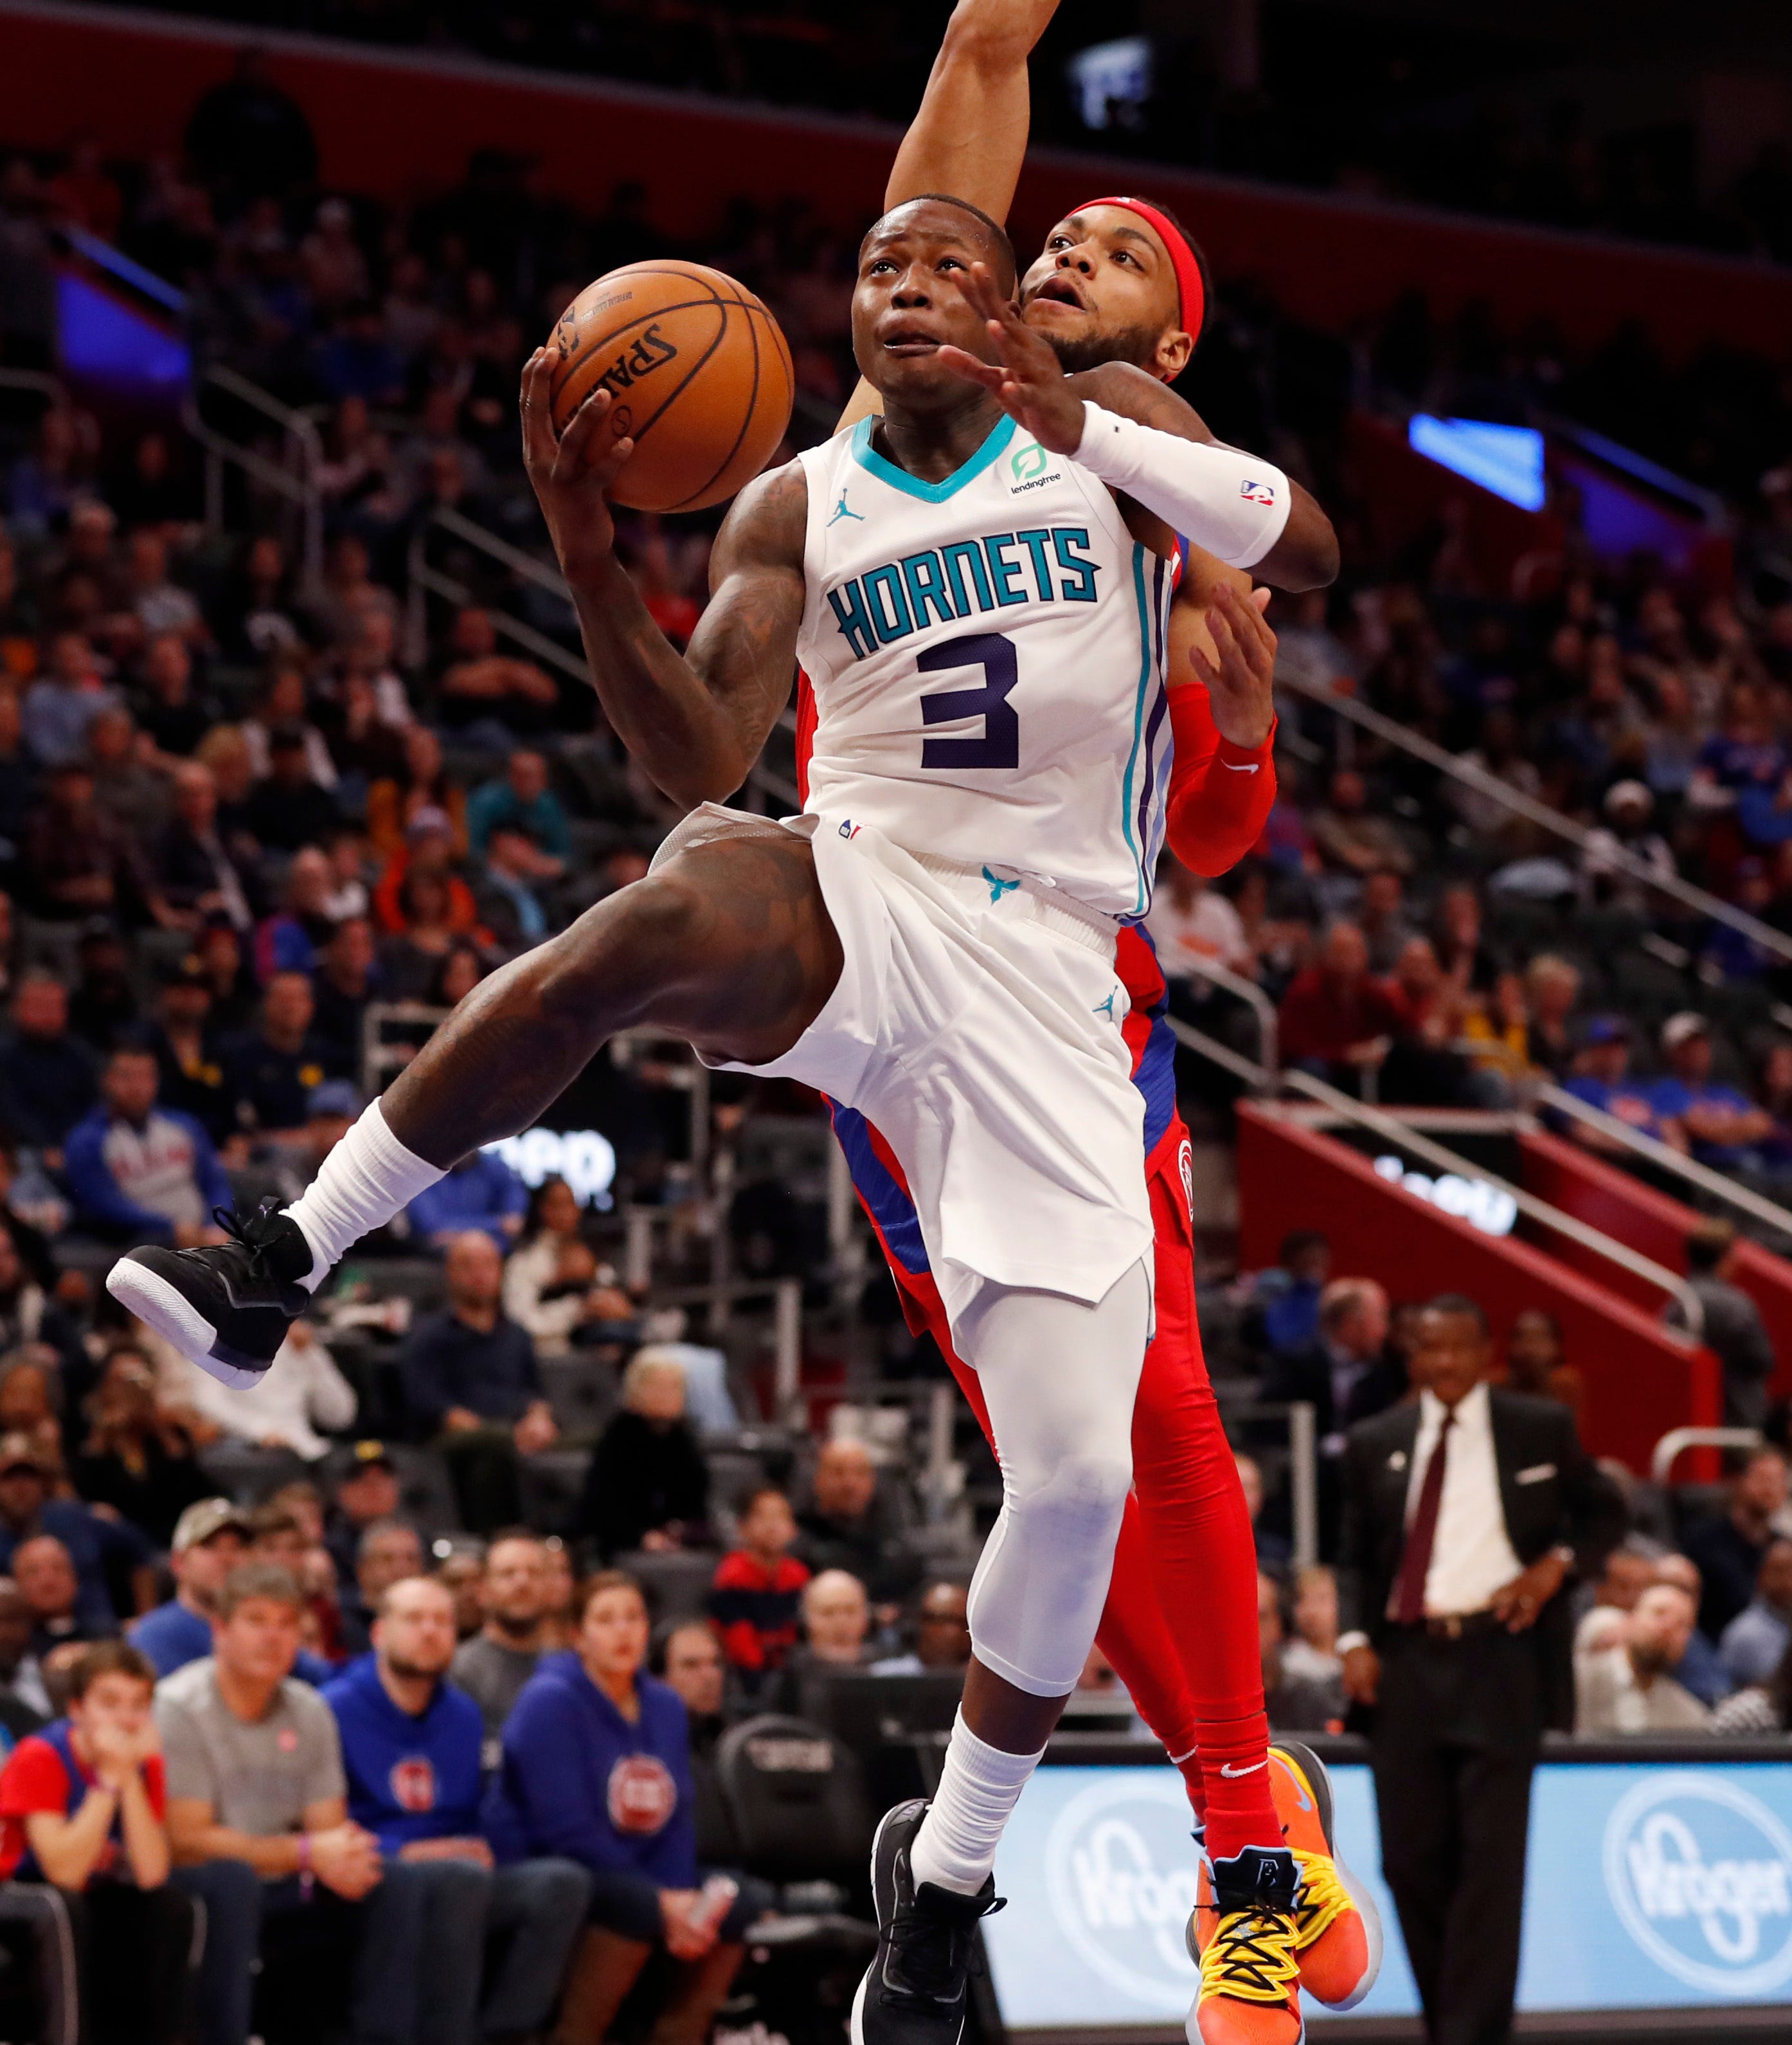 Hornets guard Terry Rozier attempts a layup as Pistons guard Bruce Brown defends.